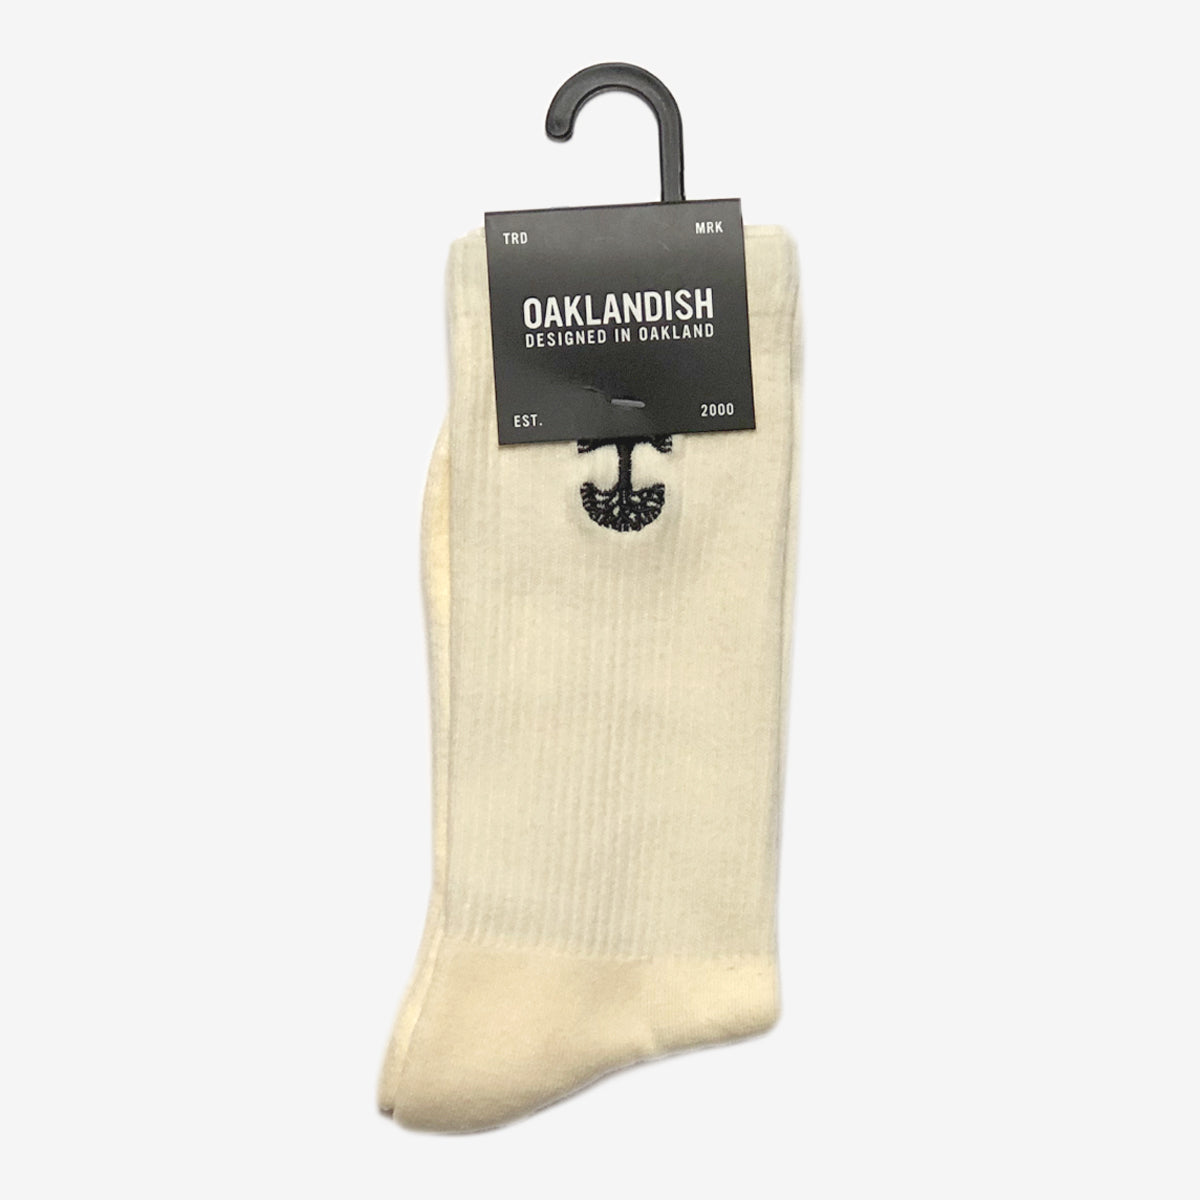 High-cut men's cream crew socks with black embroidered Oaklandish logo at the top wrapped in Oaklandish retail packaging.